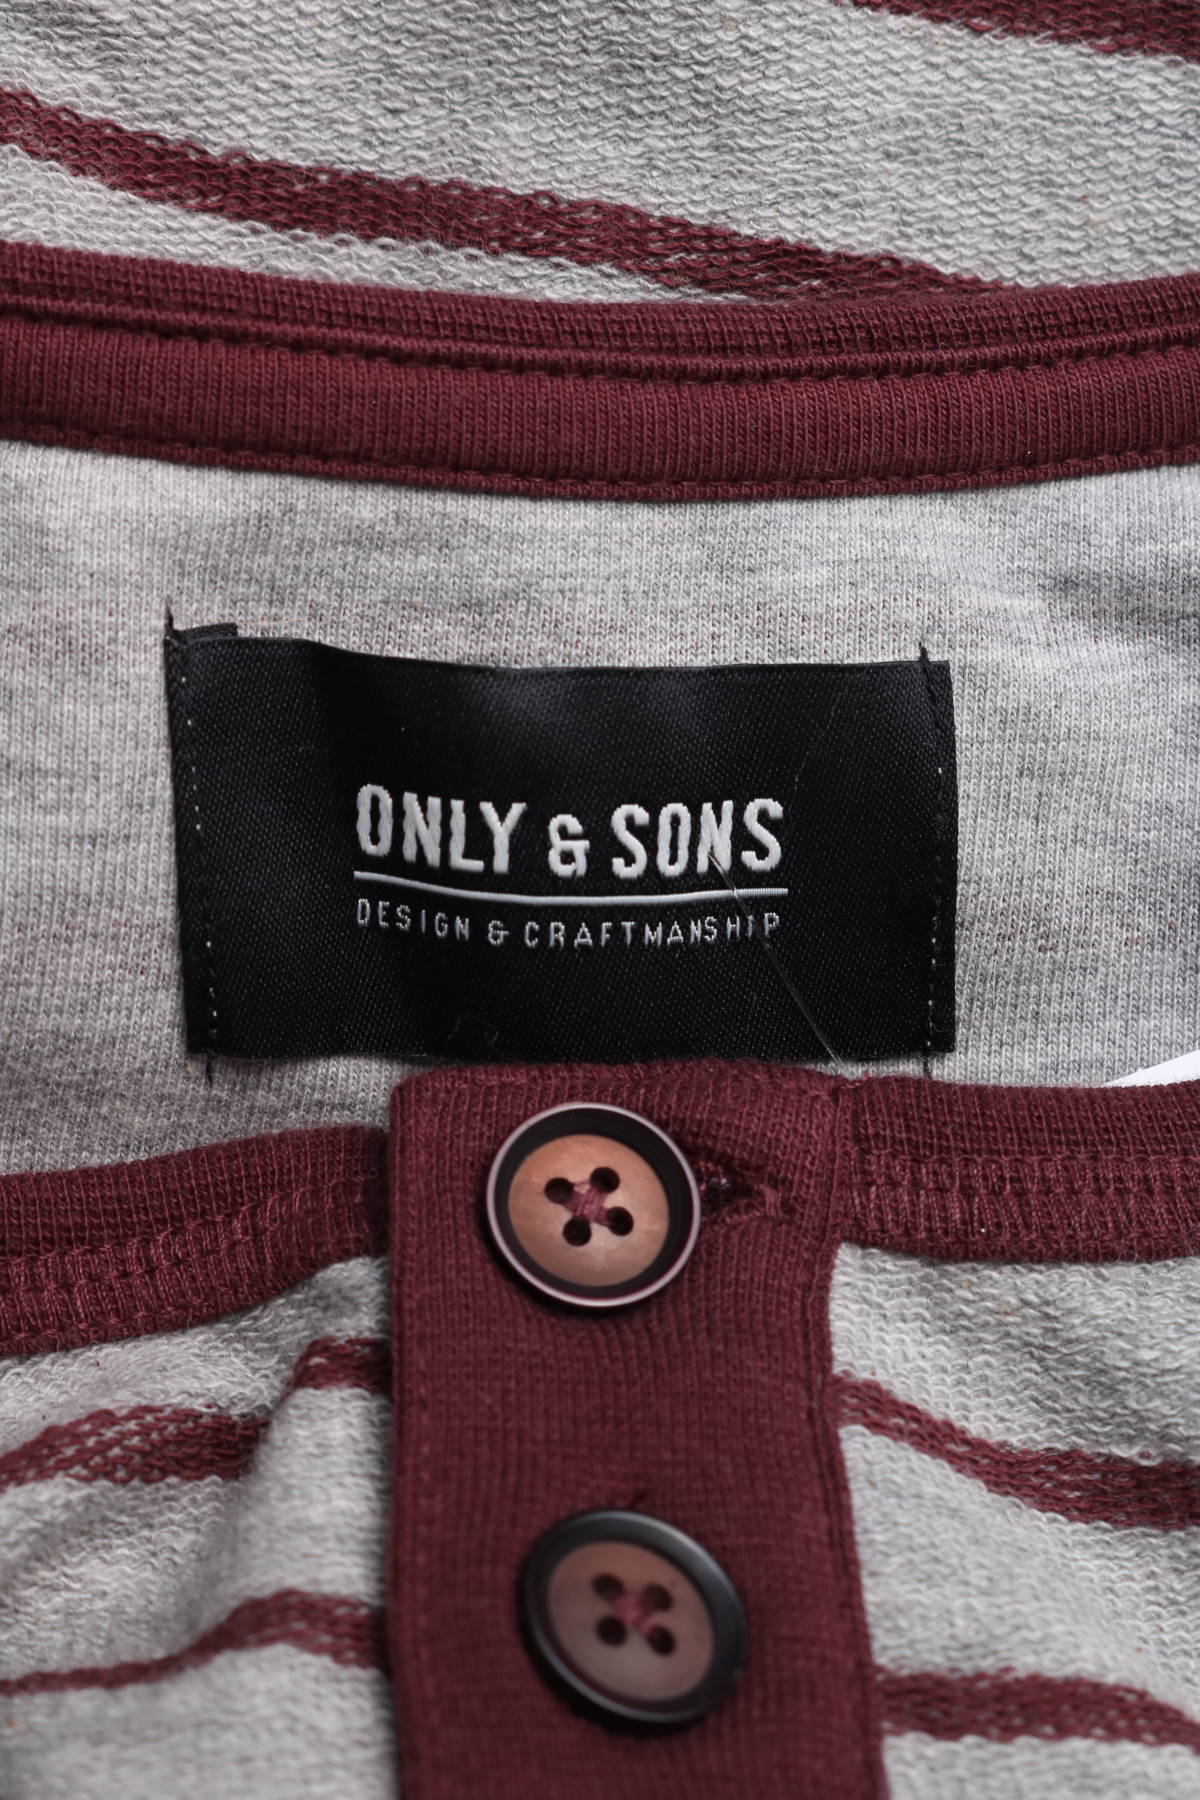 Блуза ONLY&SONS3